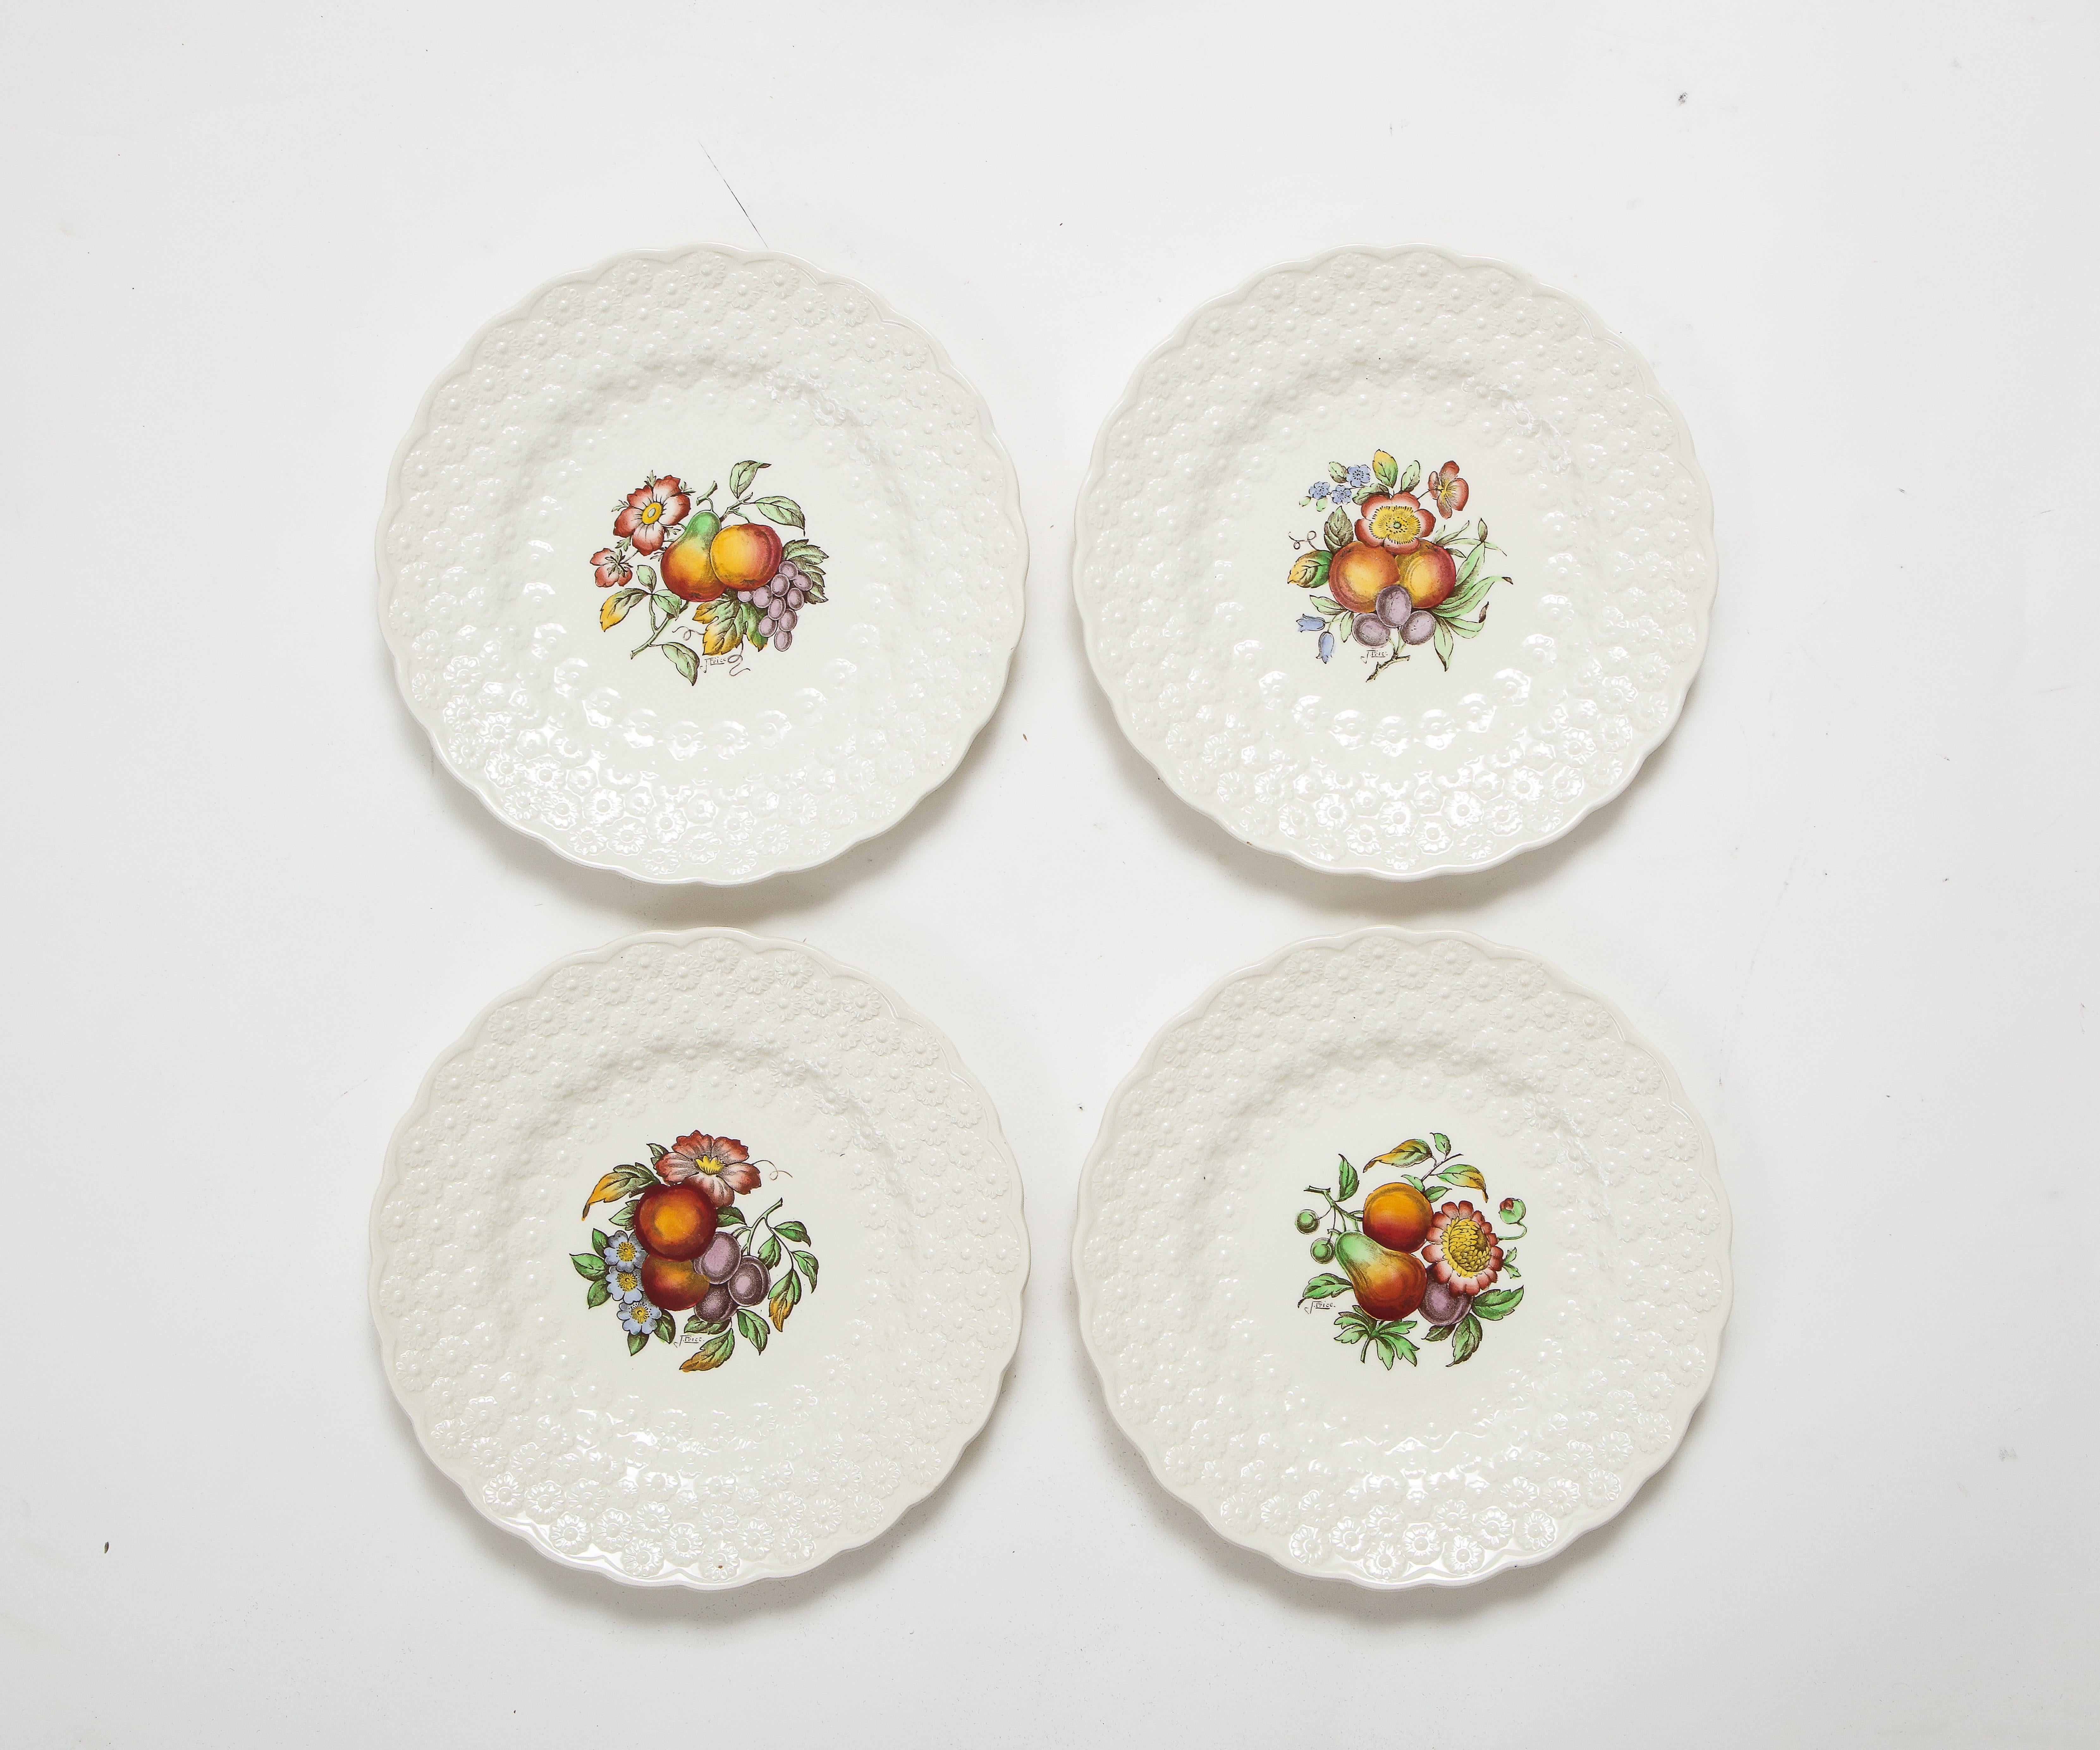 Set of 20 Alden pattern porcelain plates featuring various fruit/flower motifs with an embossed daisy rim. Signed.